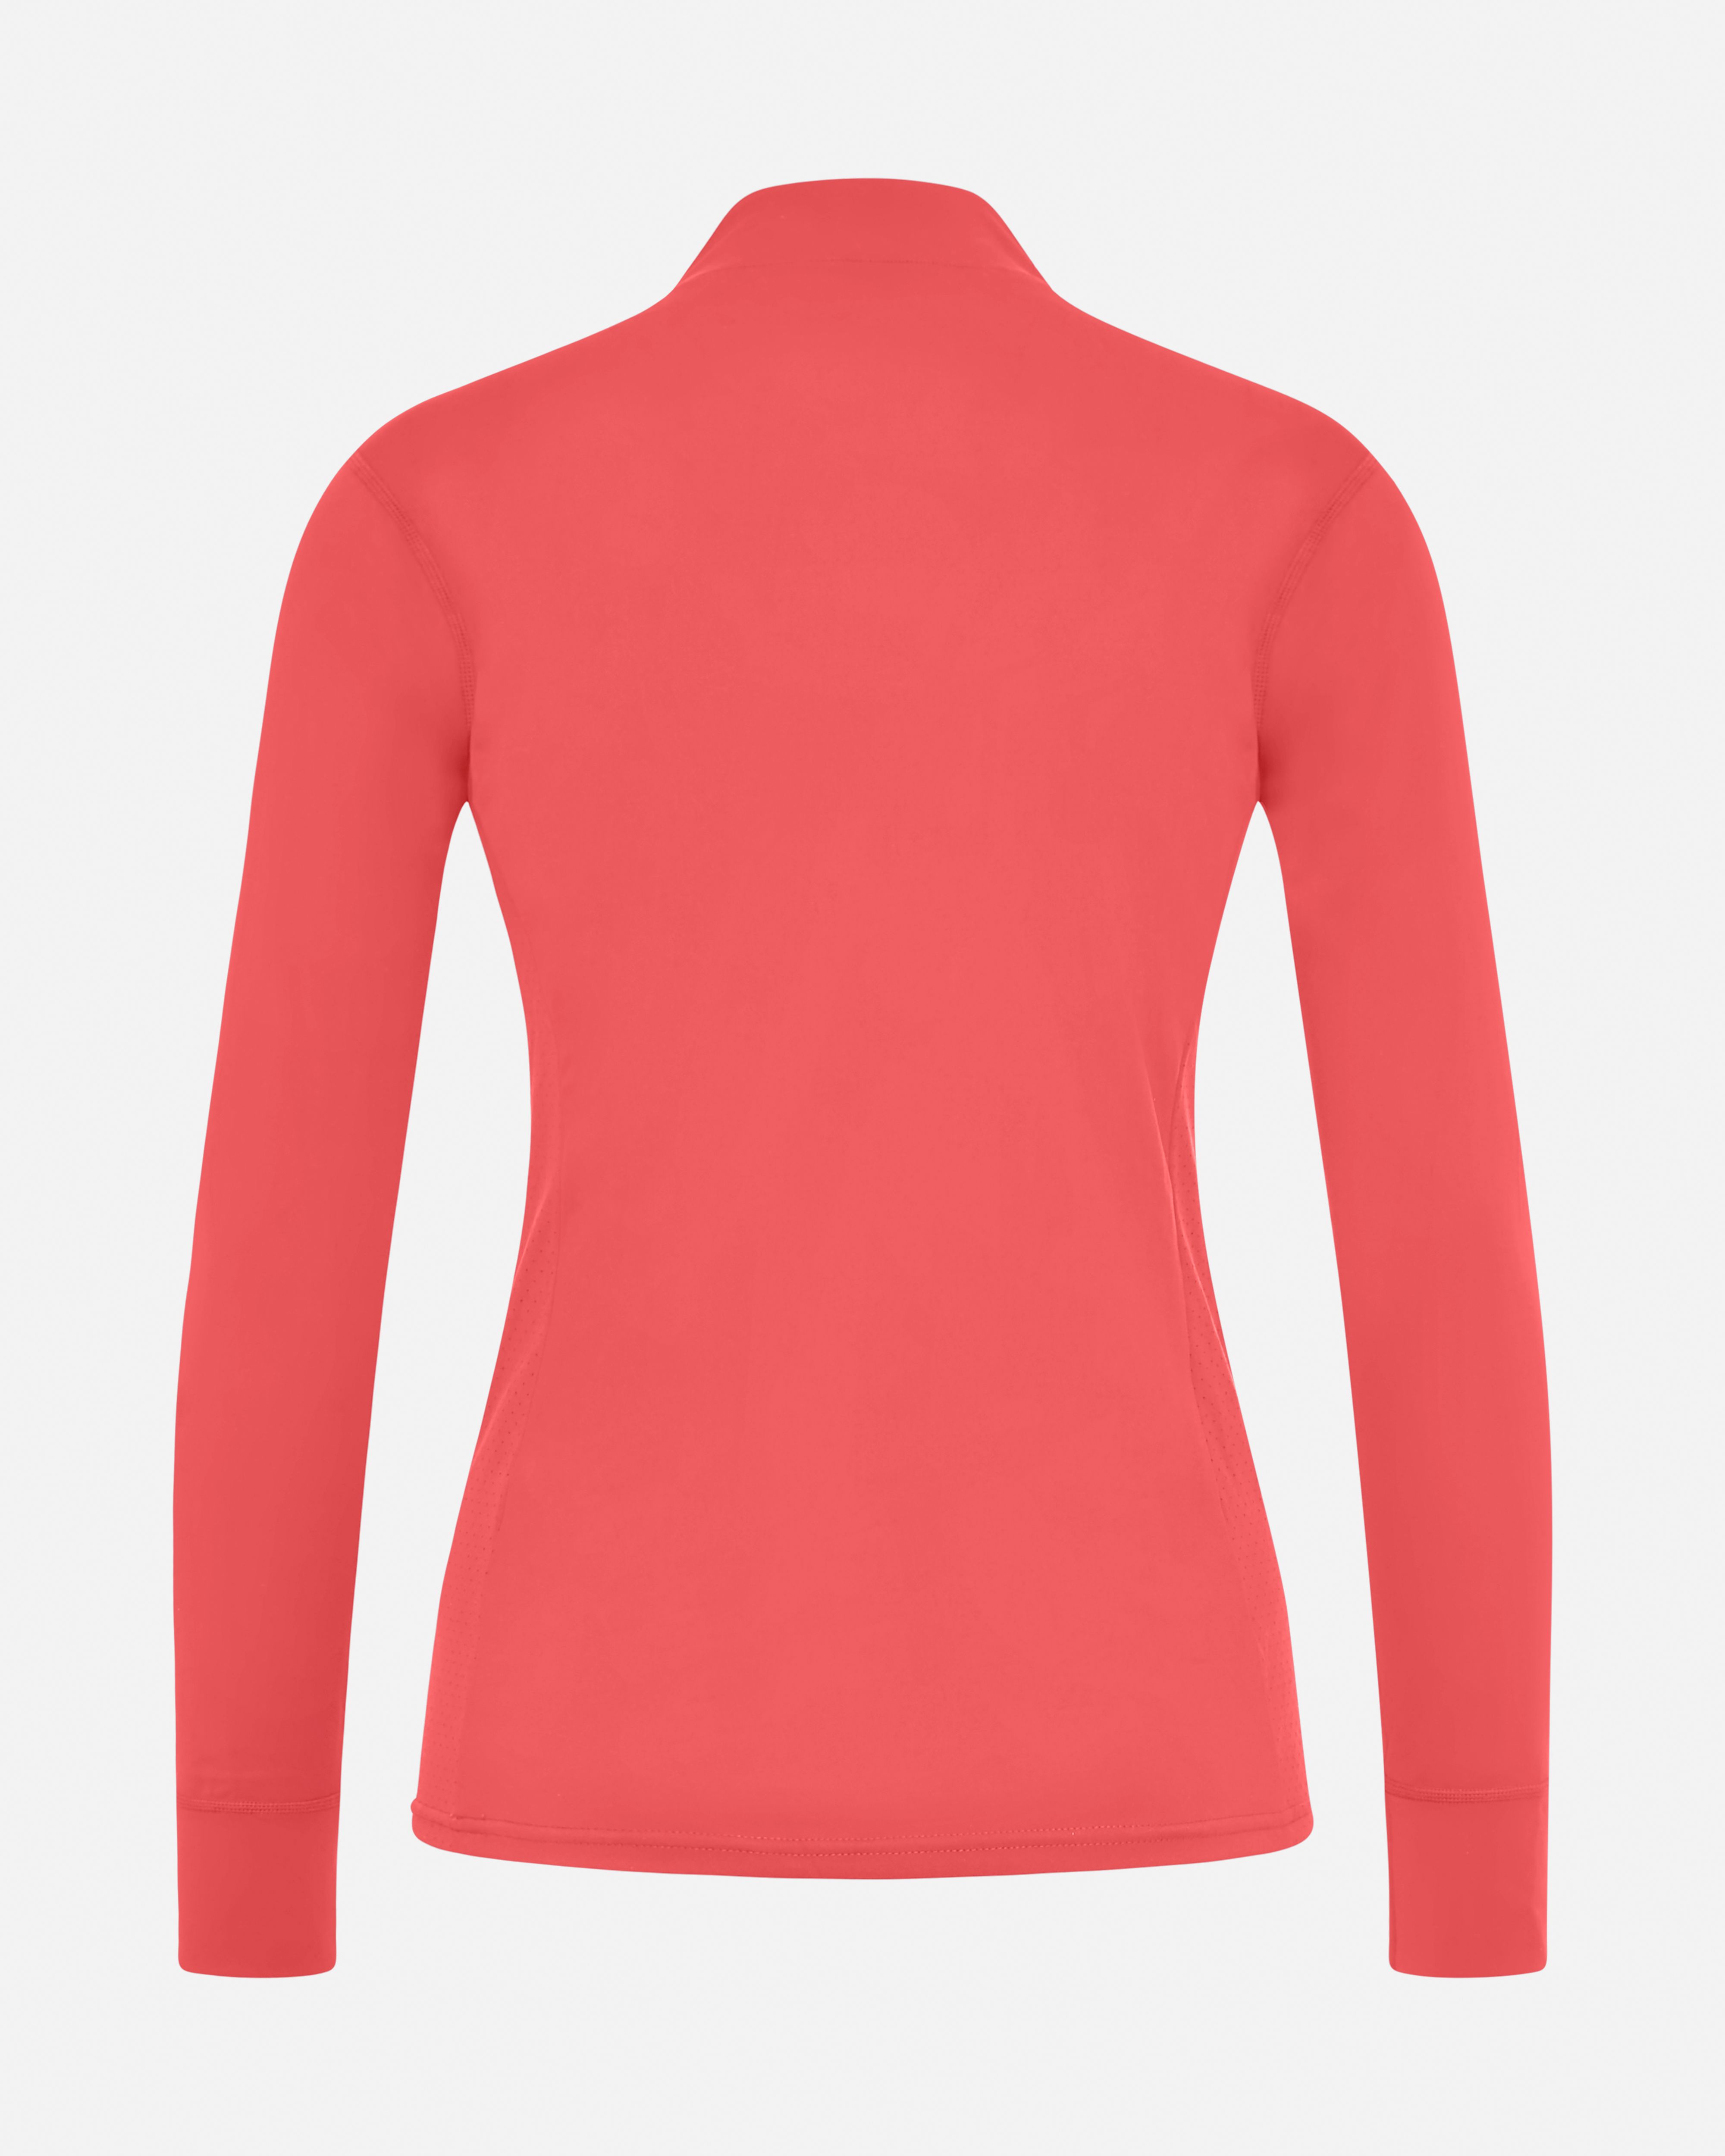 eaSt UV-Protection Shirt | Coral | XL